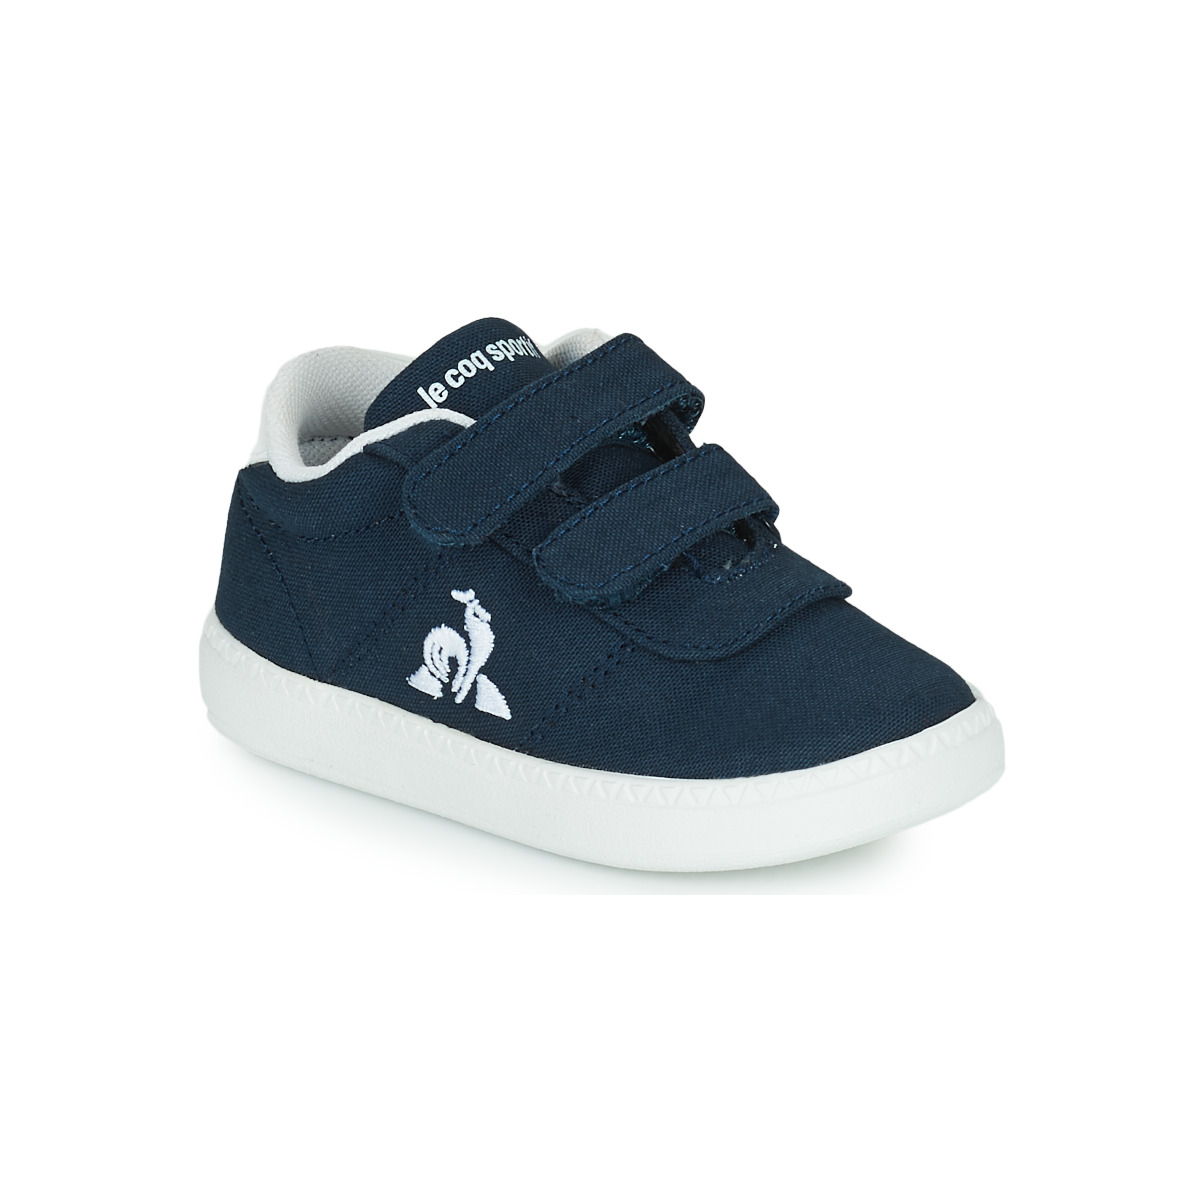 Xαμηλά Sneakers Le Coq Sportif COURT ONE INF